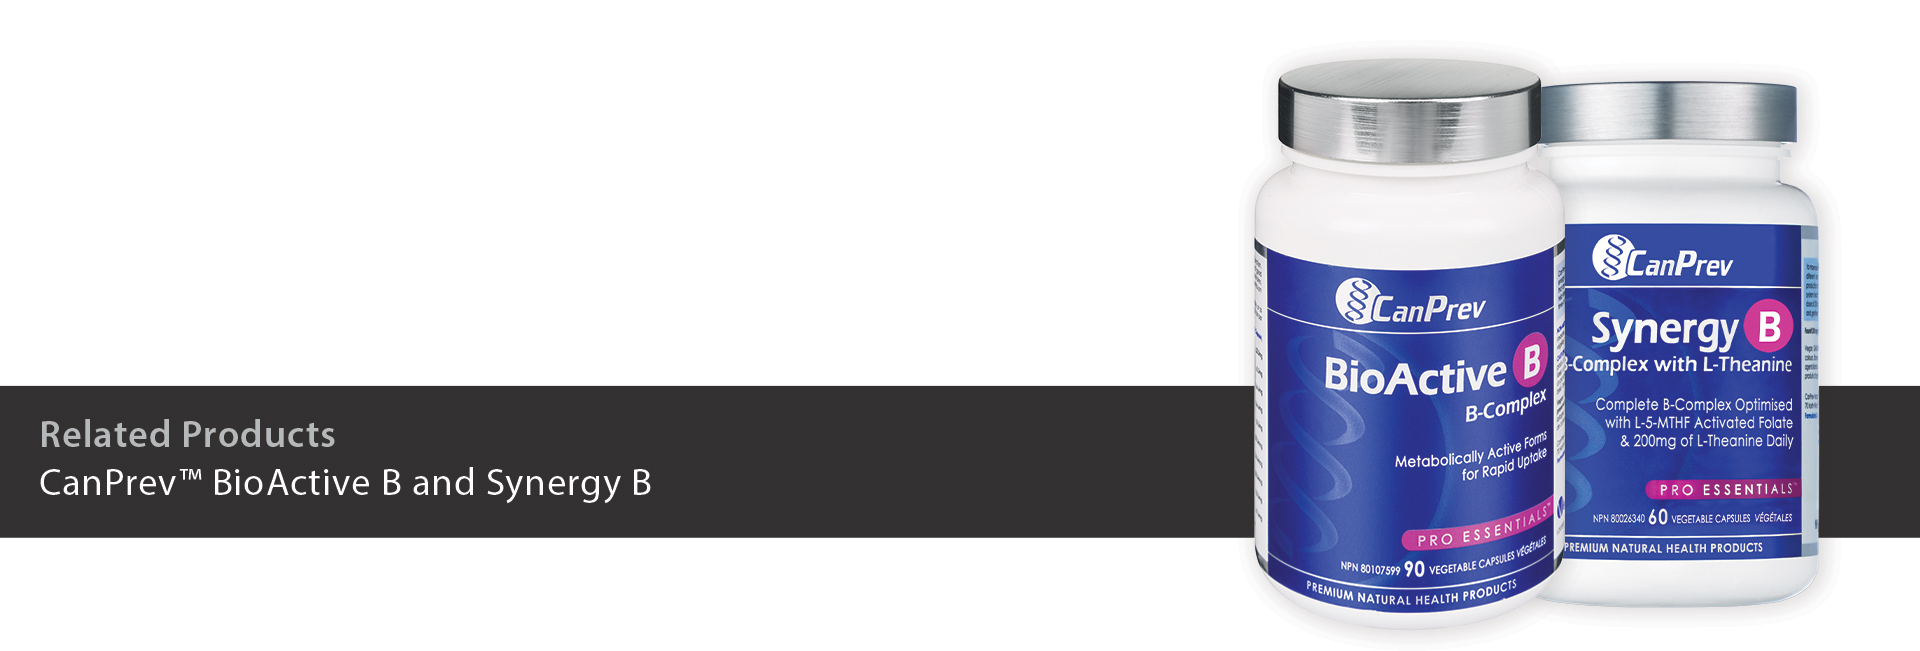 CanPrev™ BioActive B and Synergy B